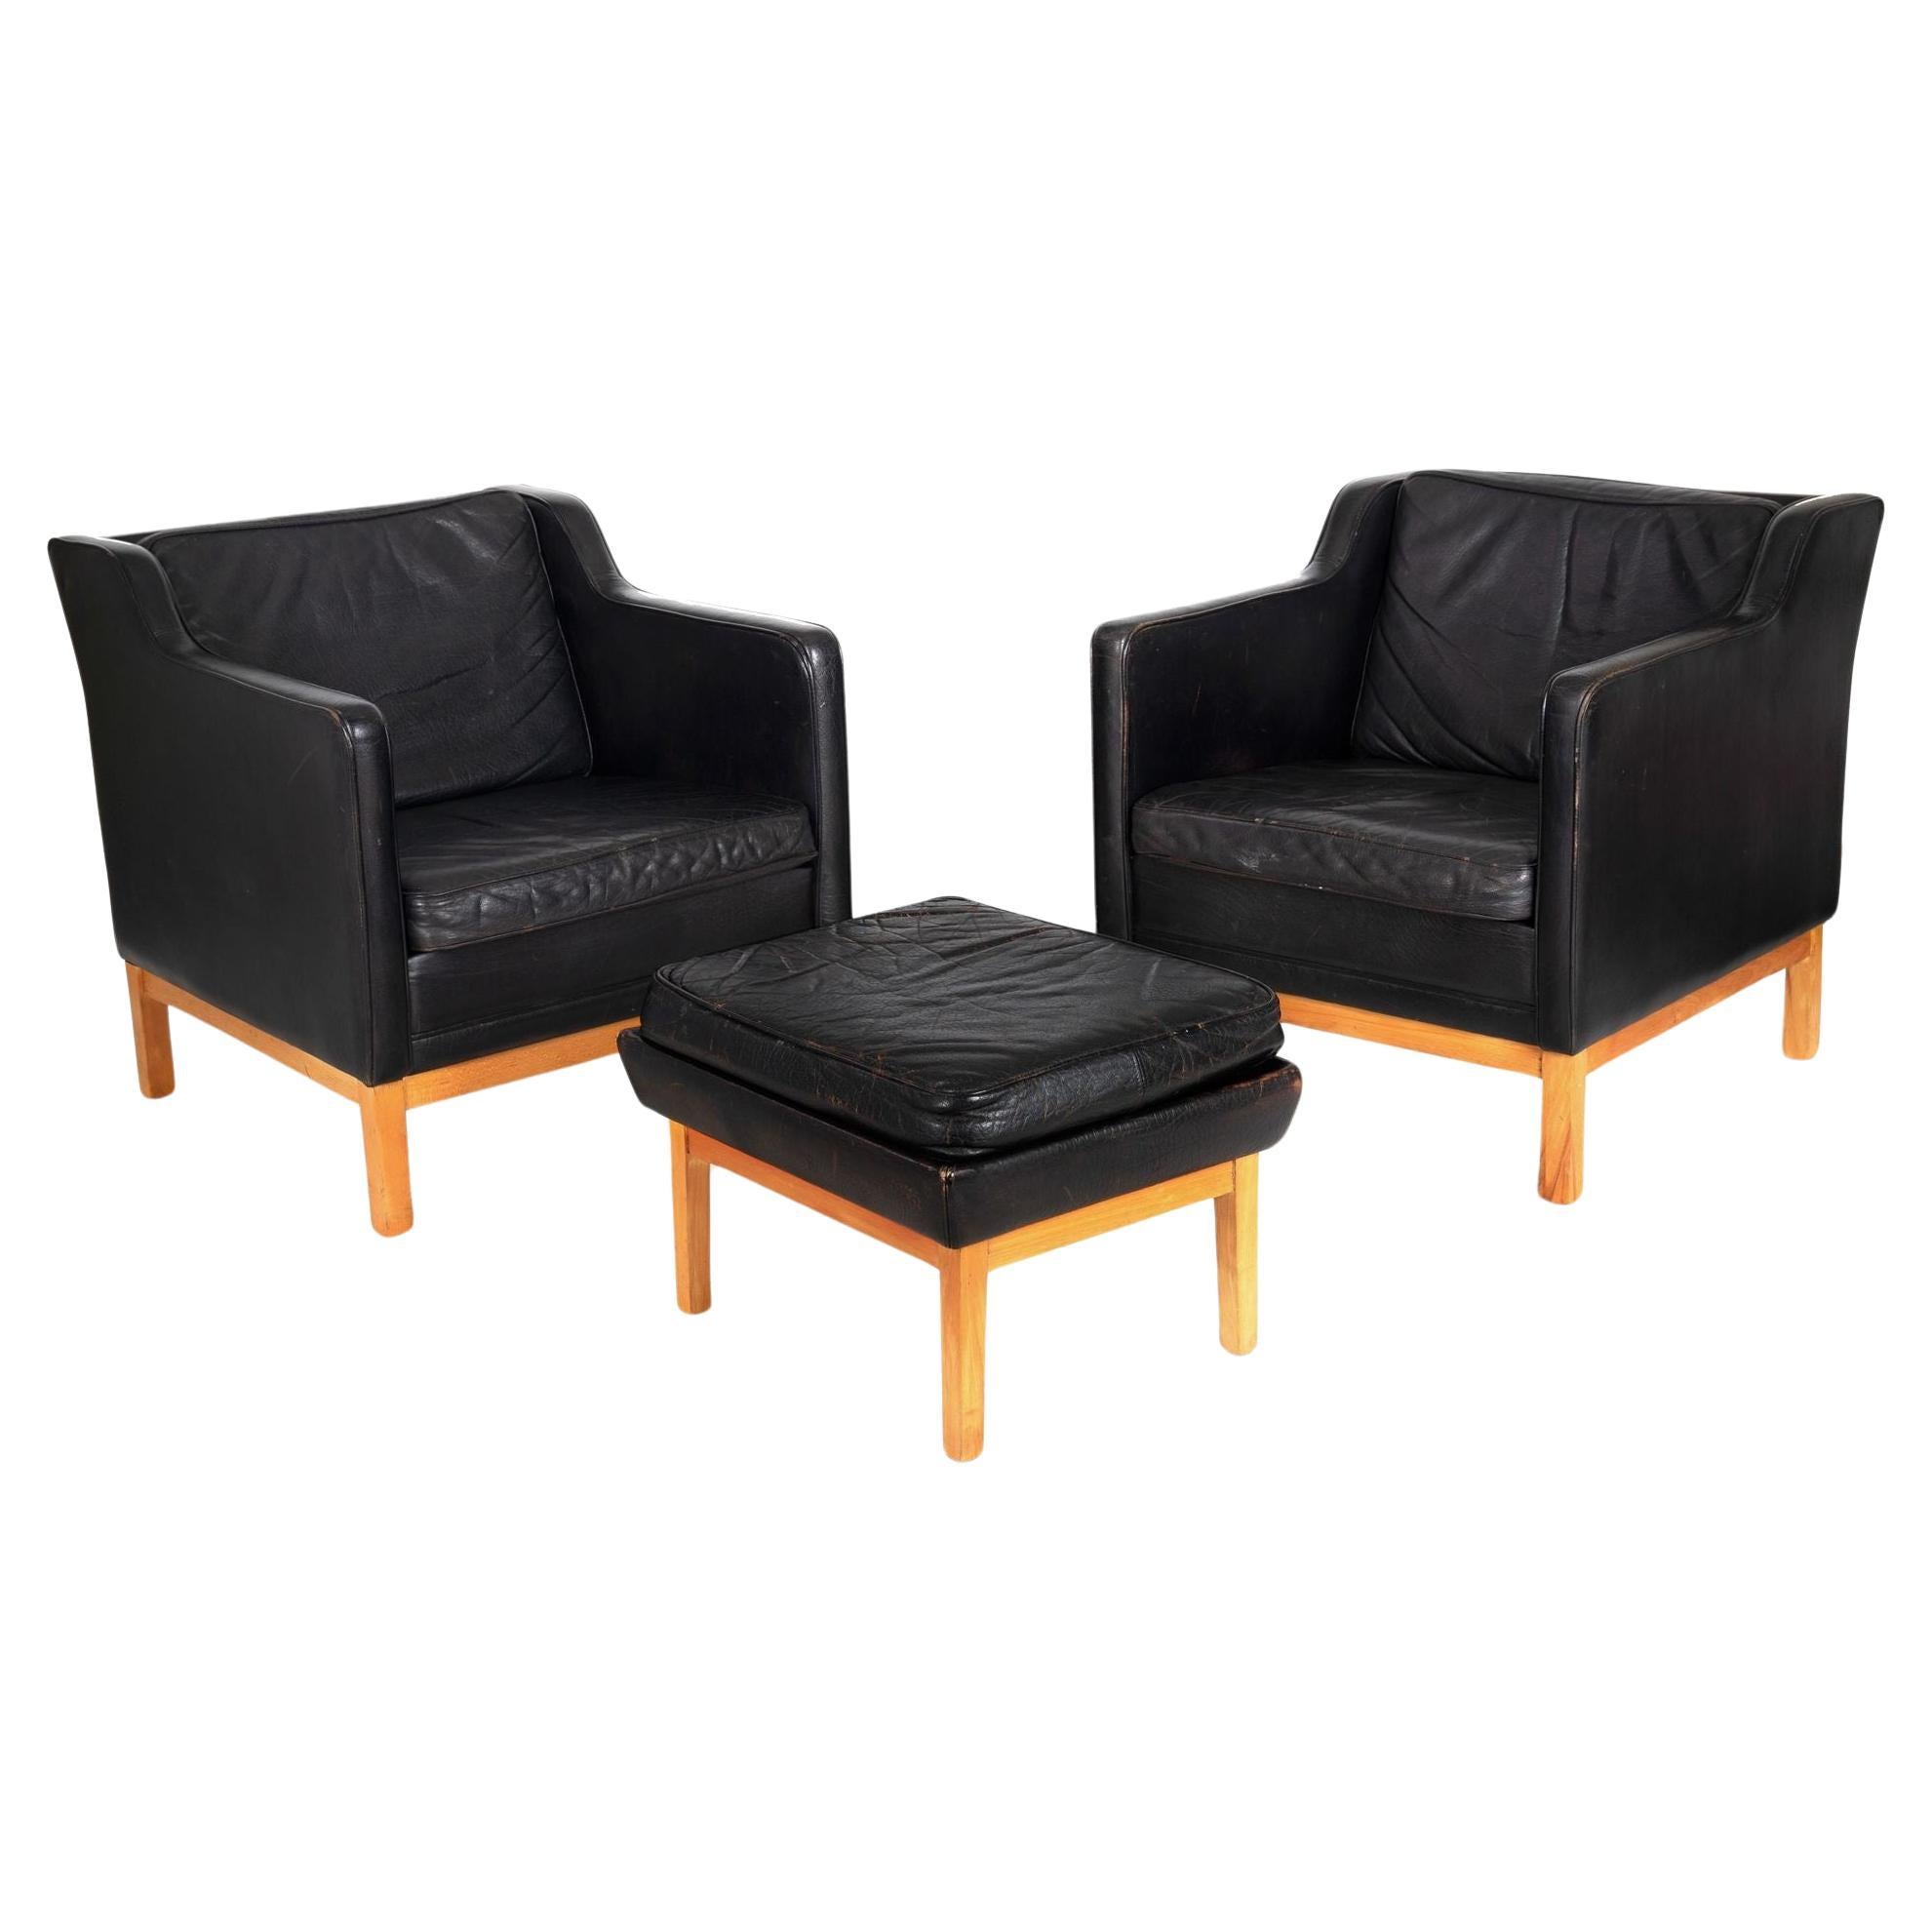 Pair of Mogens Hansen MH195 Black Leather Armchairs with Ottoman Stool